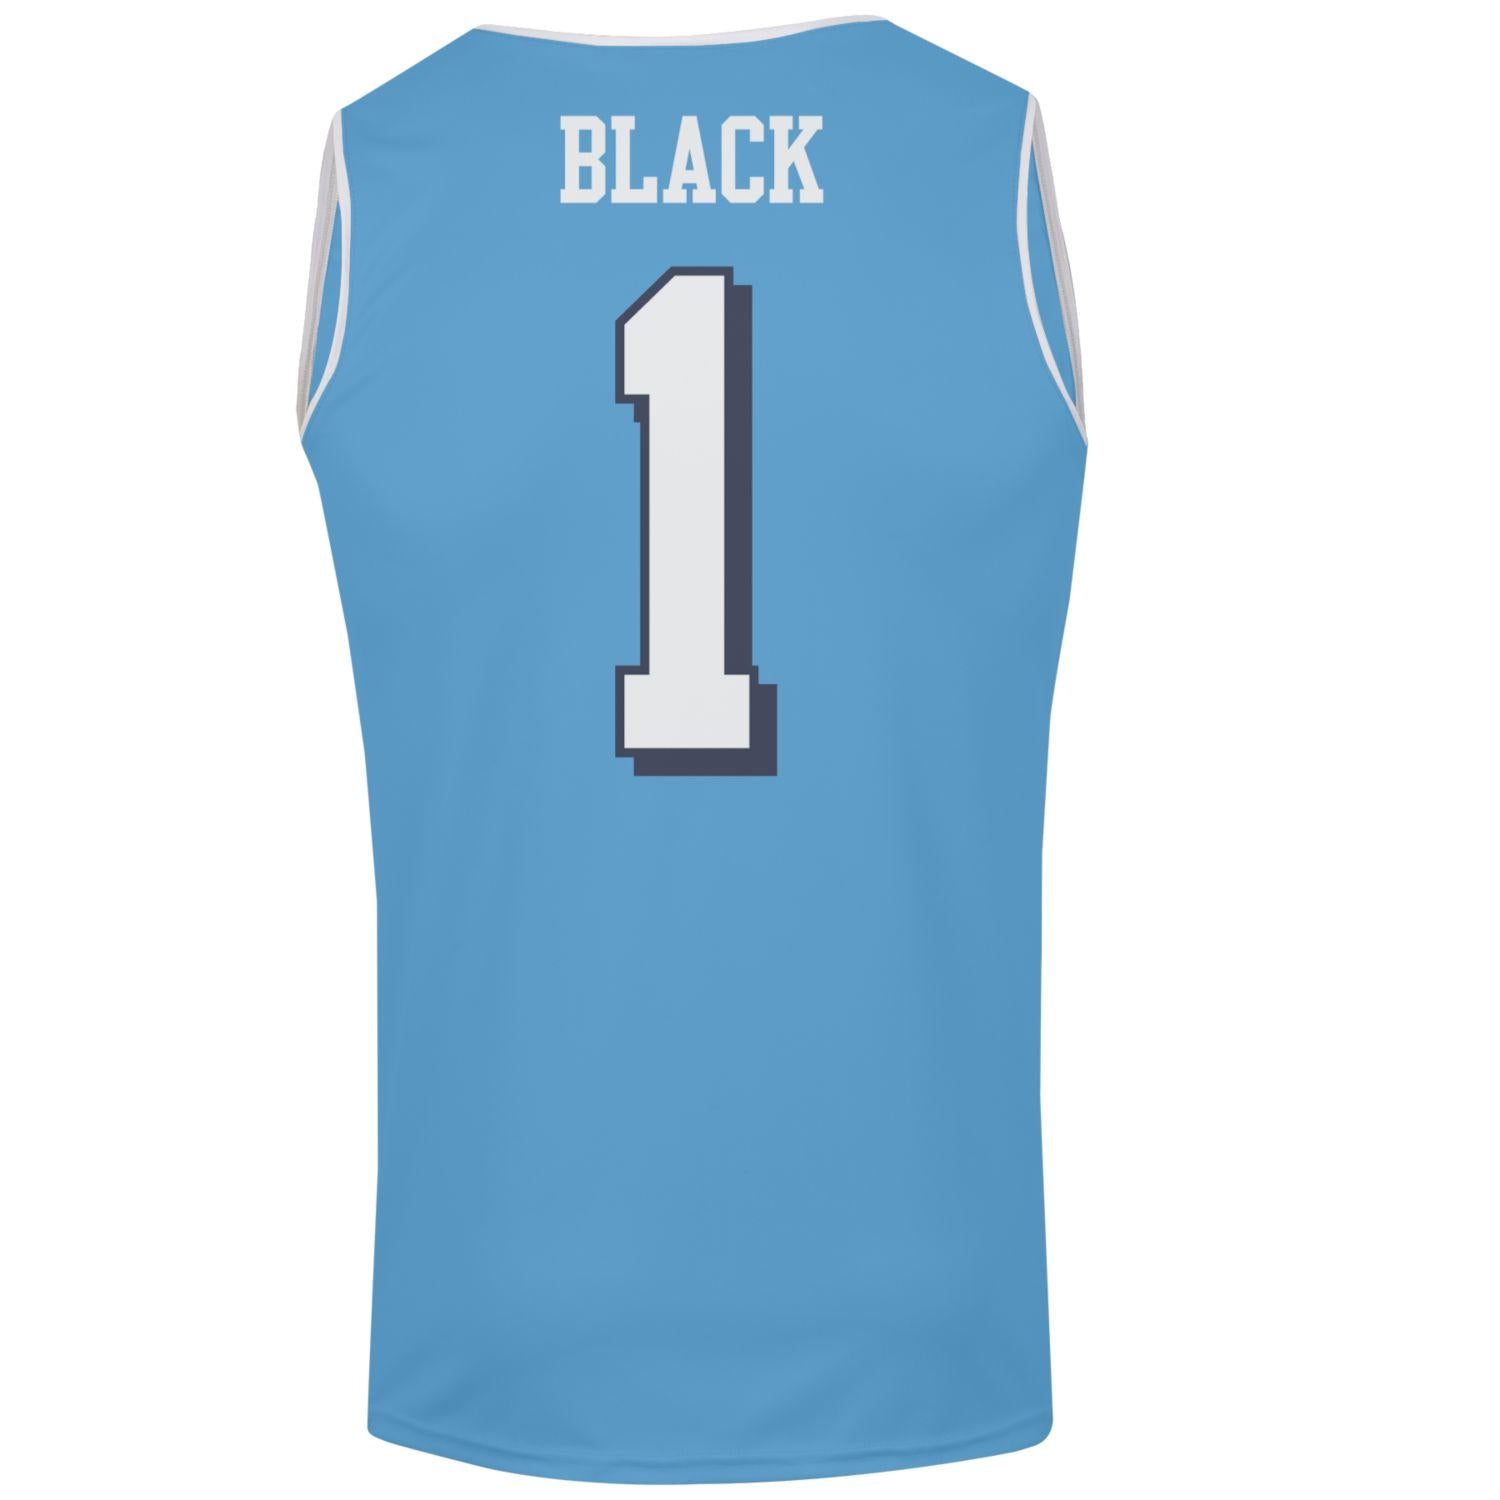 Leaky Black #1 Jersey - Youth